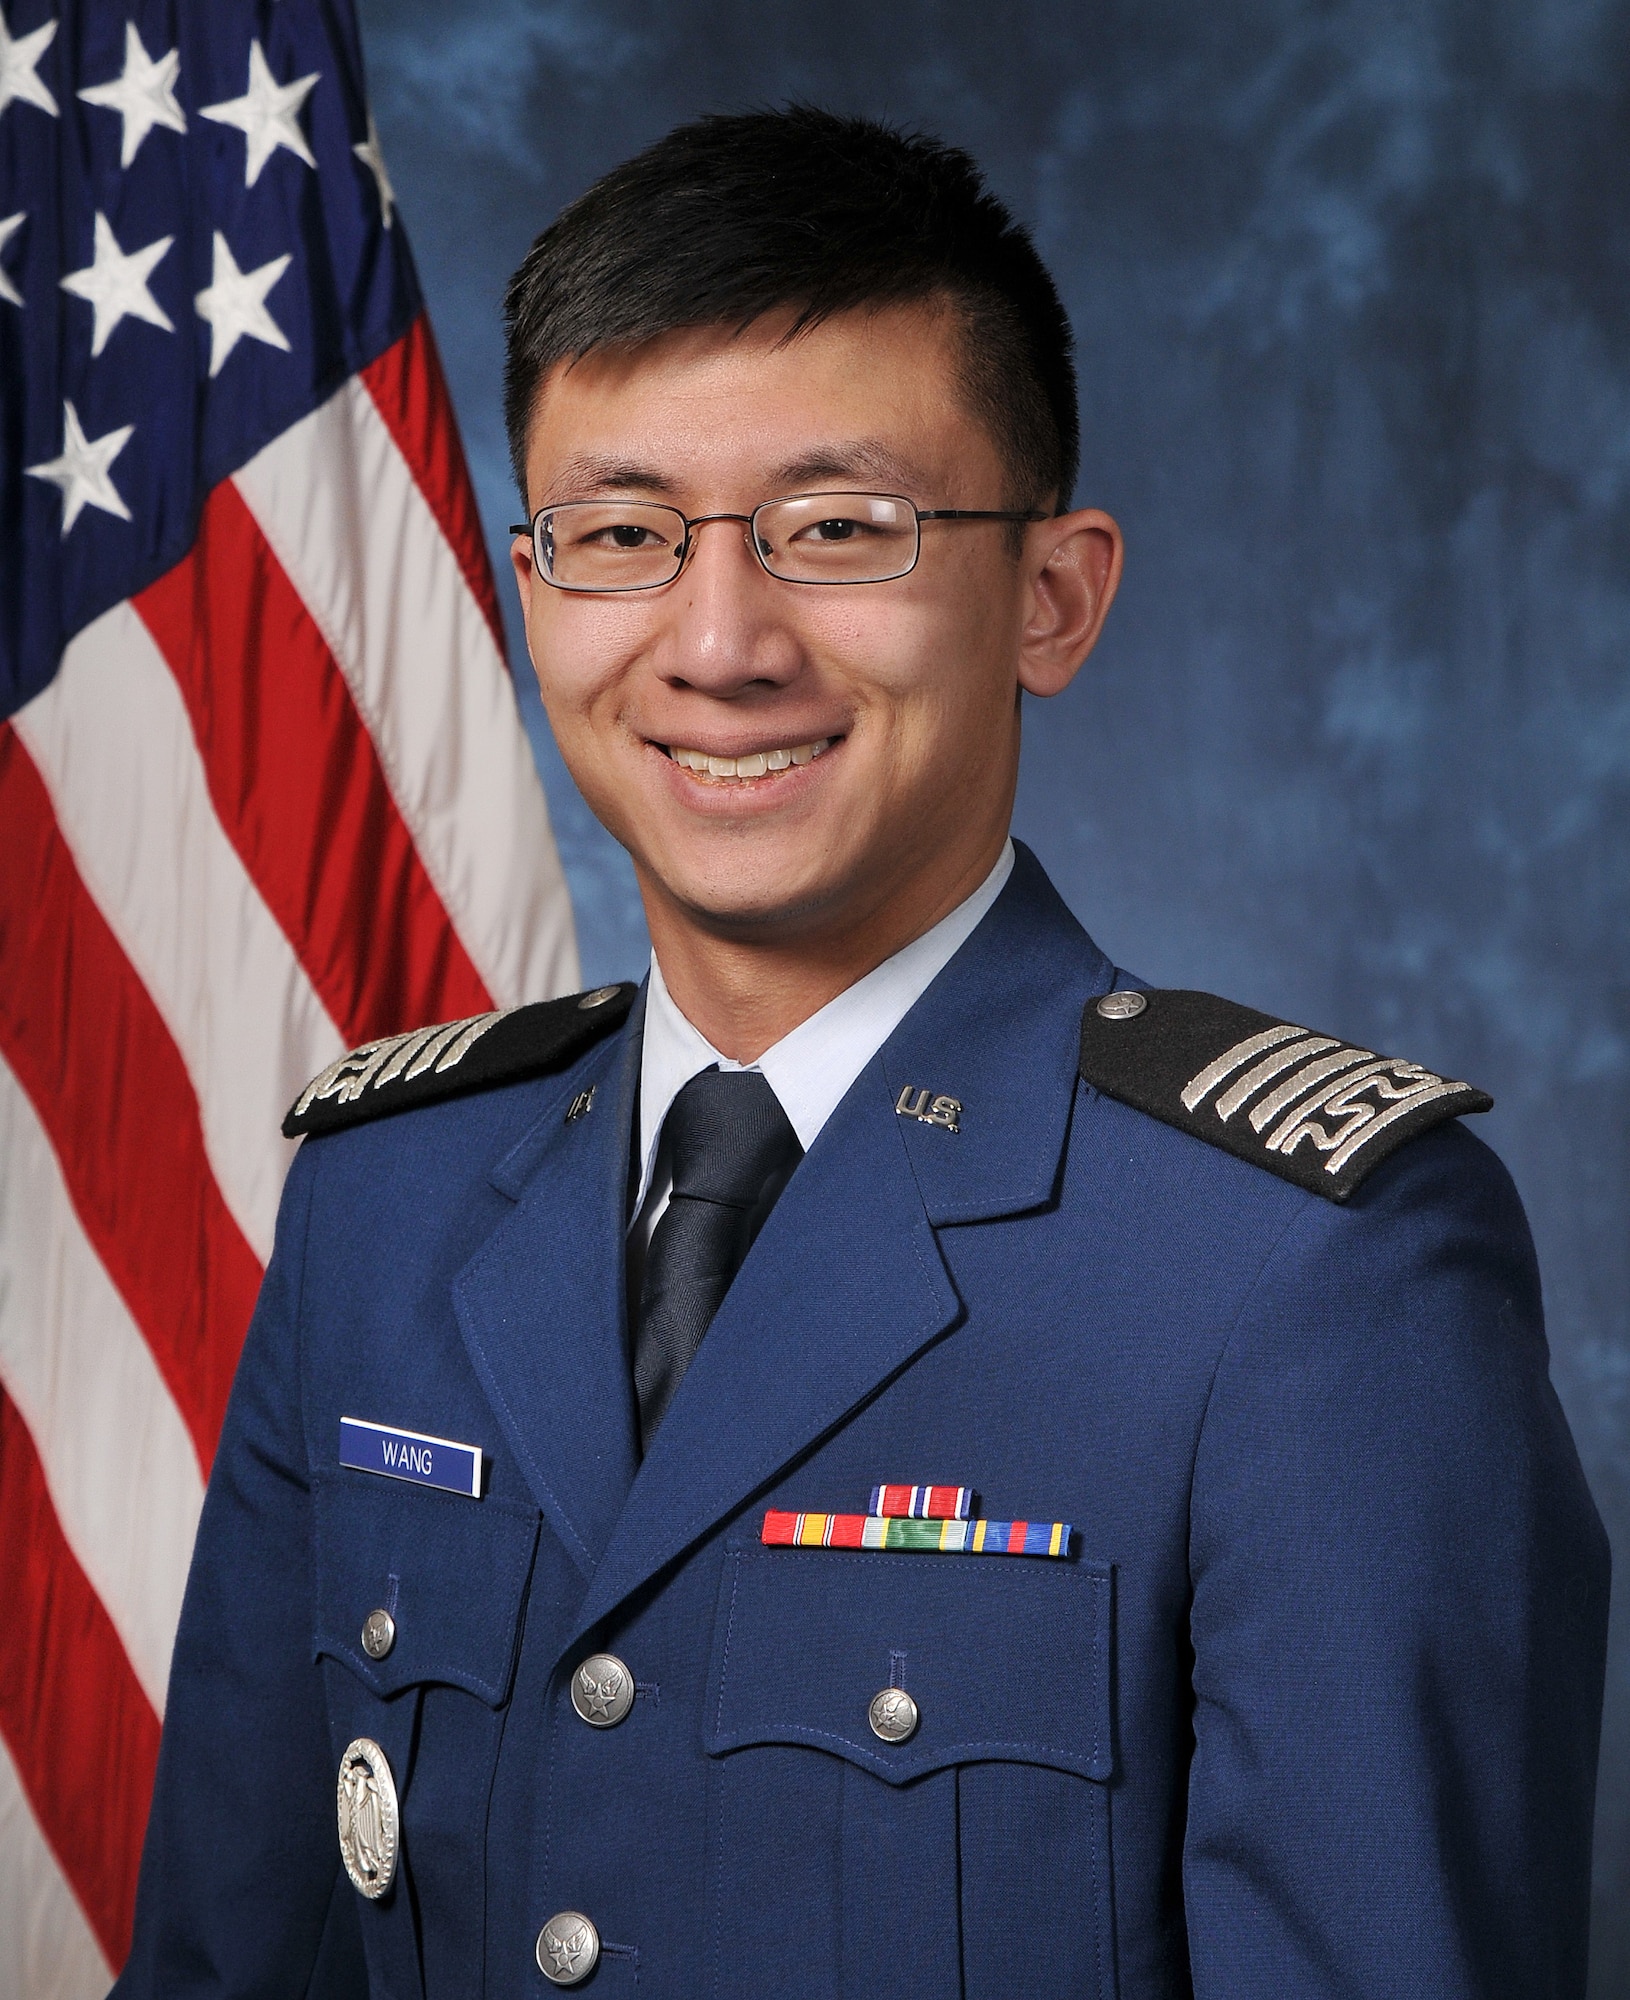 Cadet 1st Class Kwo-Zong Wang will be a member of a U.S. Air Force Academy's Class of 2015. Wang is scheduled to graduate from the Academy May 28, 2015, with a bachelor's degree in Foreign Area Studies. (U.S. Air Force photo)  